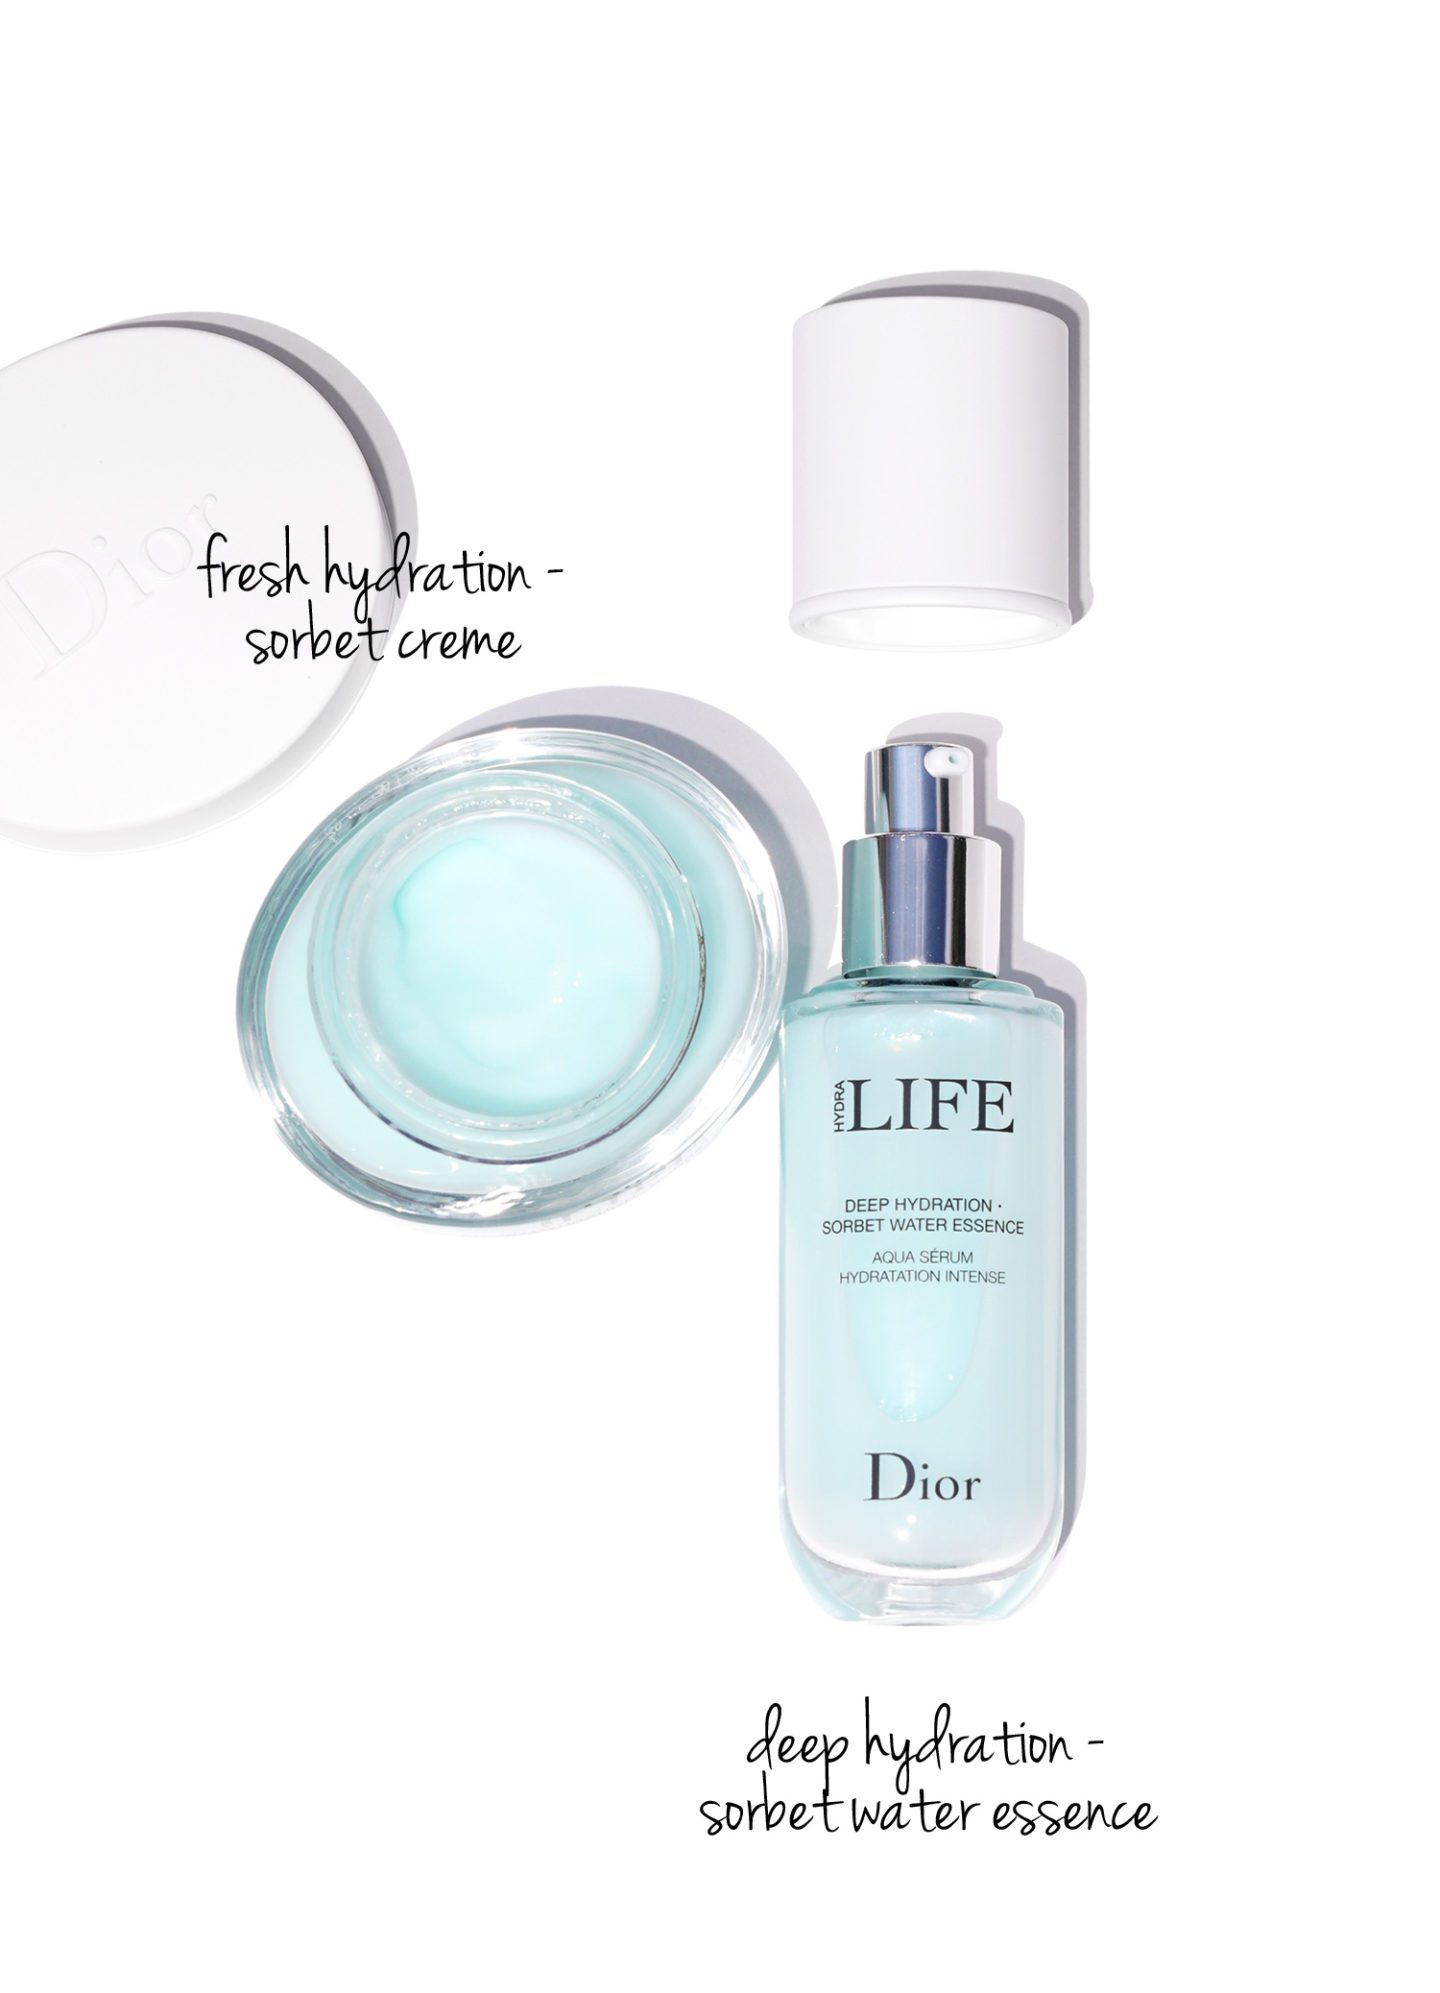 Dior Hydra Life Deep Hydration Sorbet Water Essence and Fresh Hydration Sorbet Creme | The Beauty Look Book 